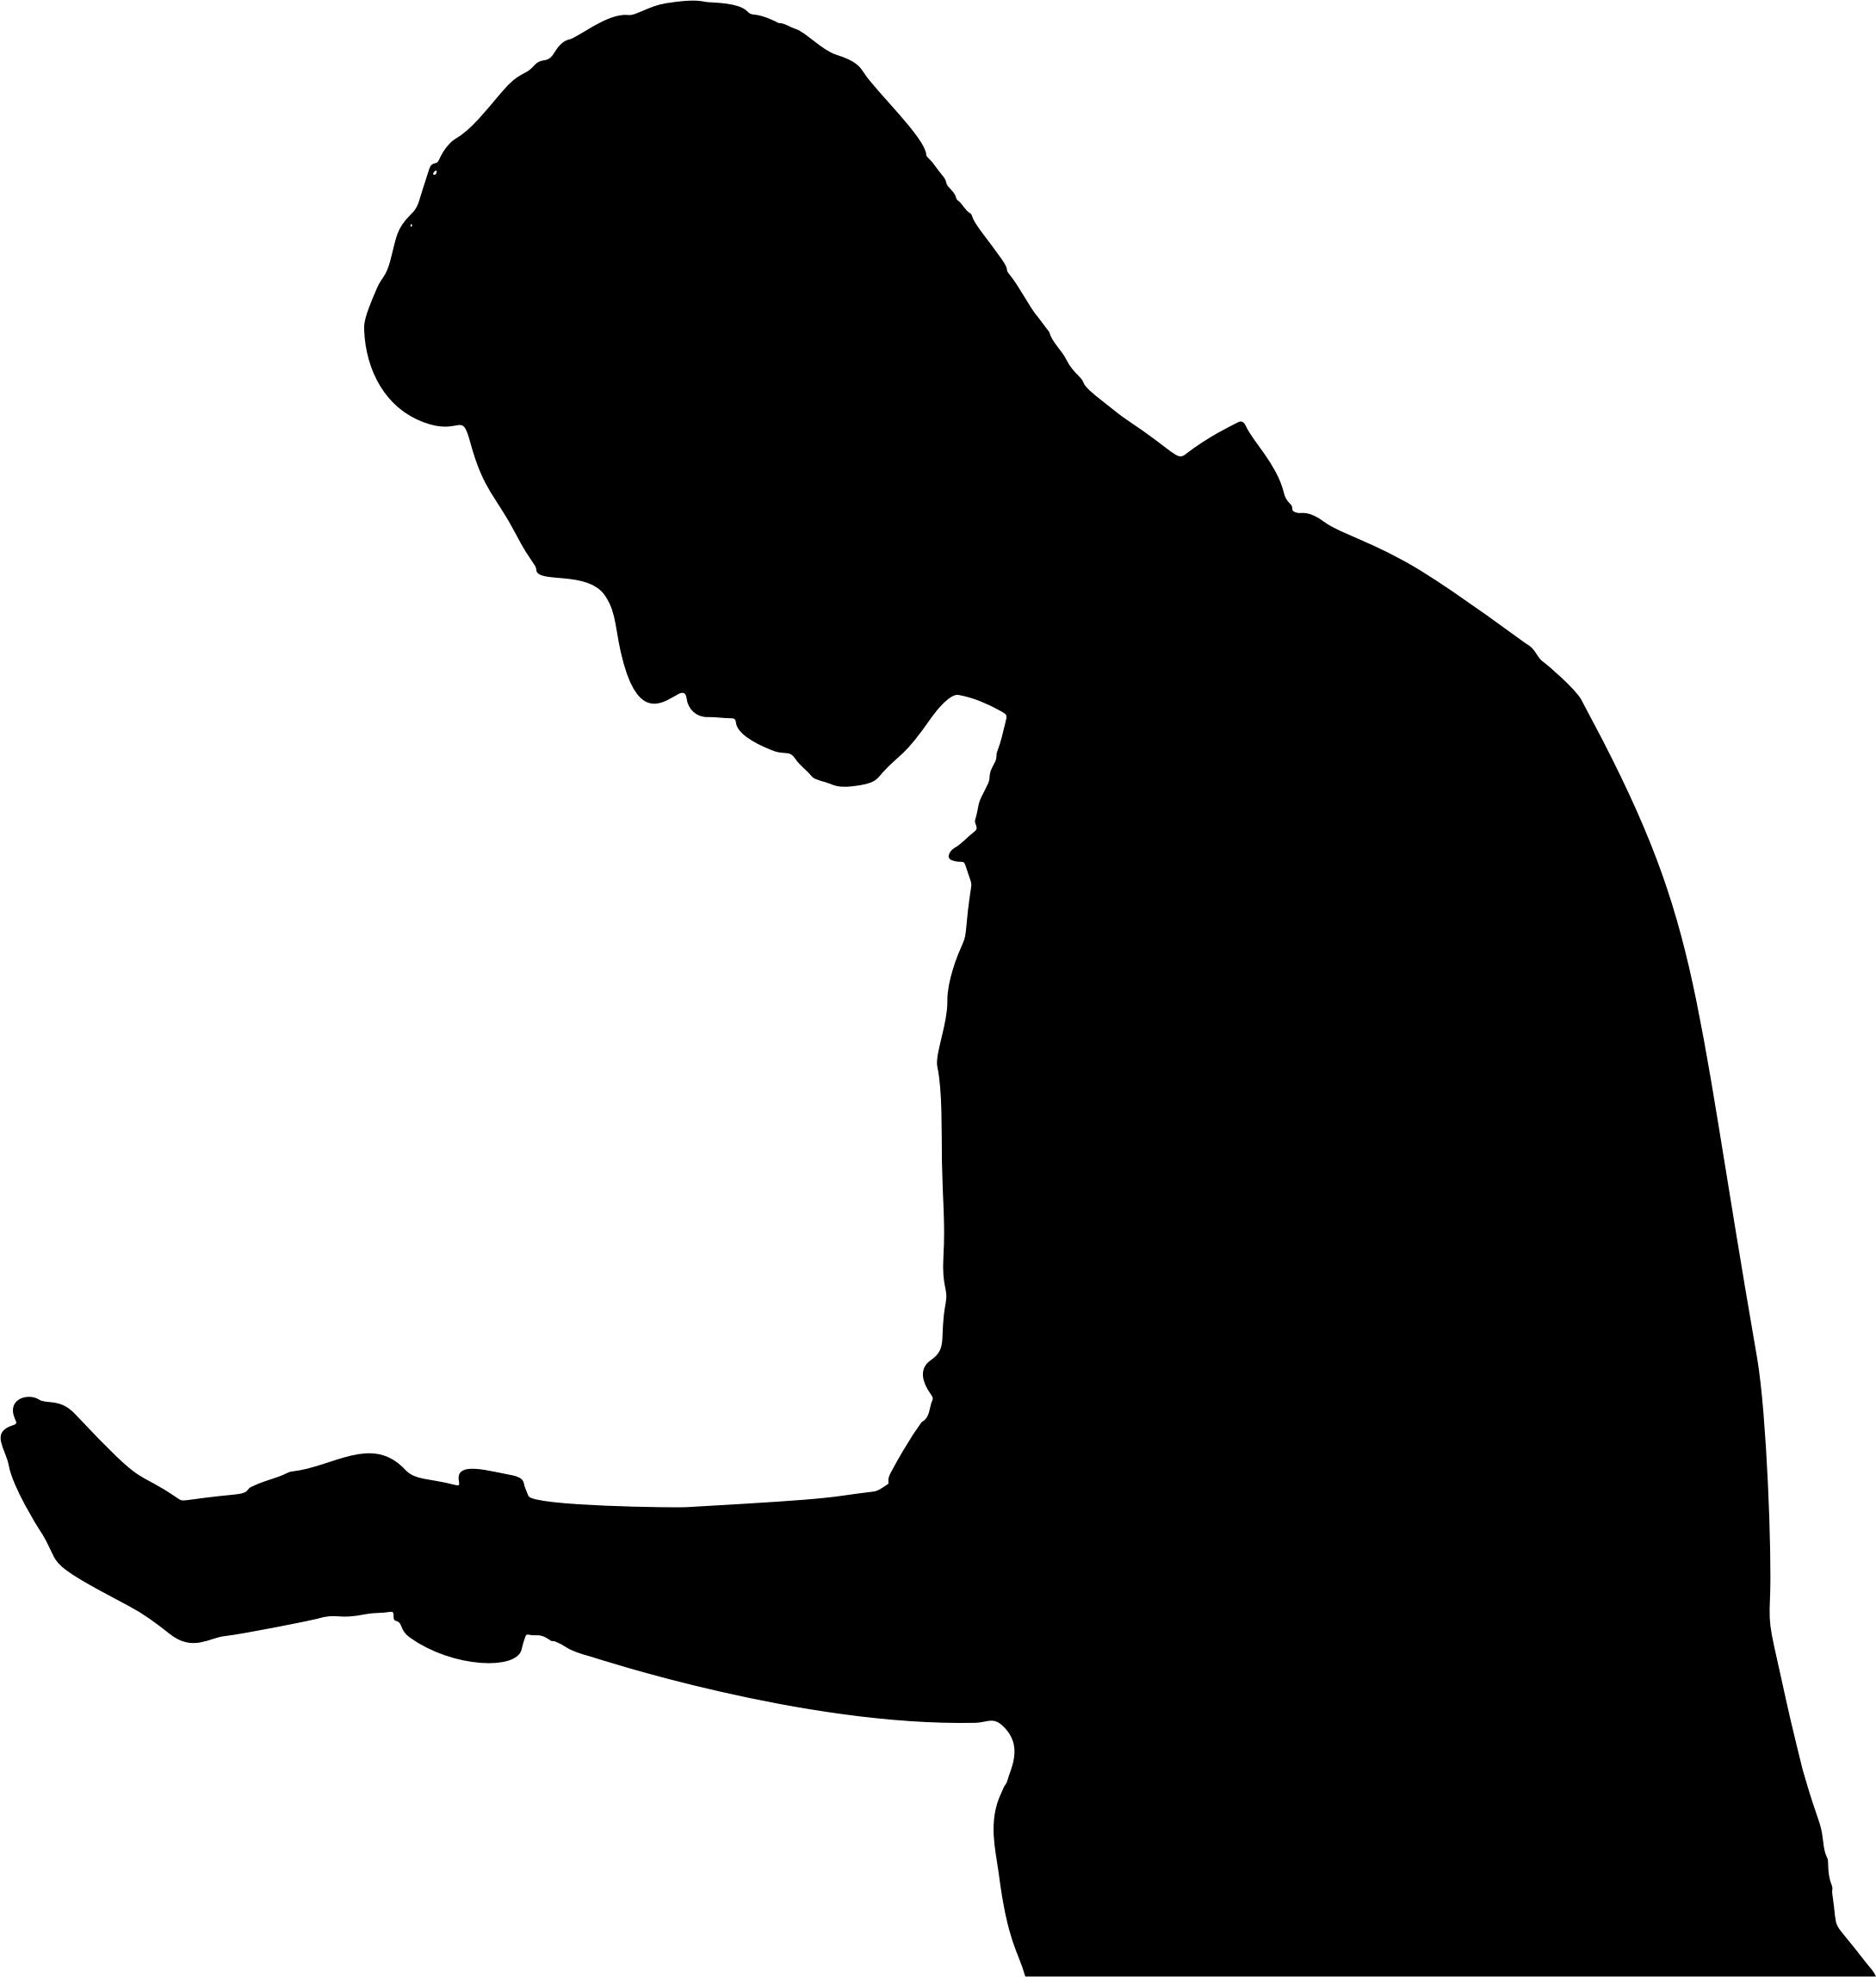 Man Looking At Hand Silhouette png icons